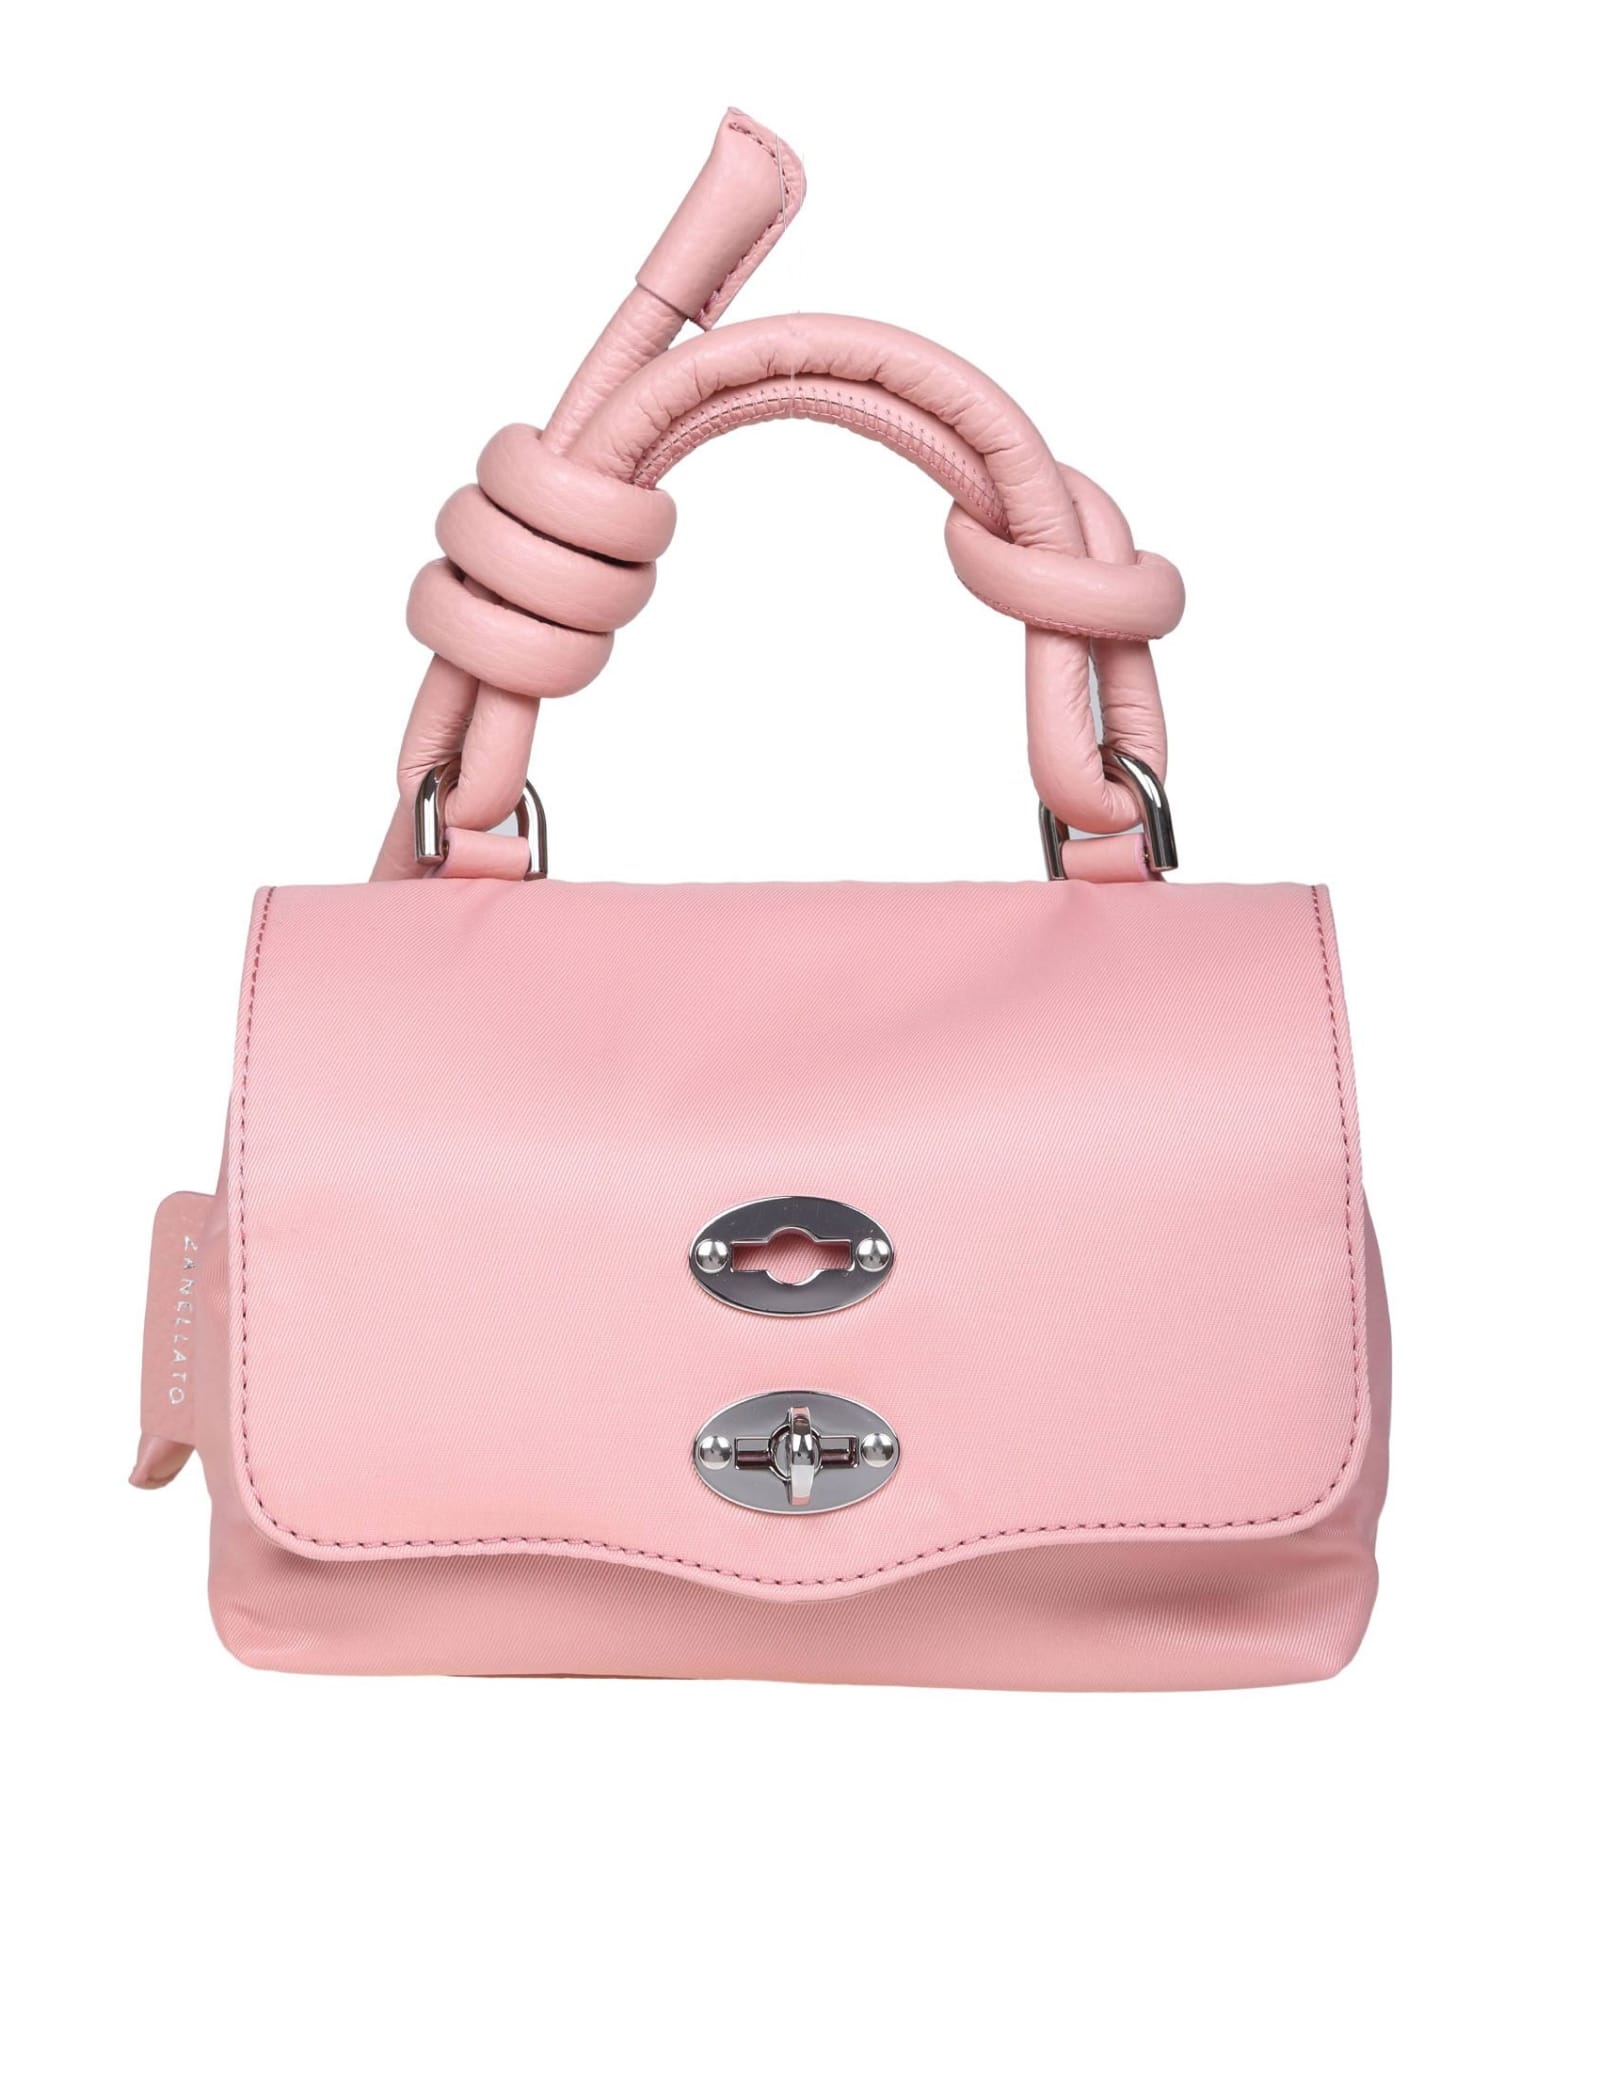 Zanellato Shiny Nylon Bag That Can Be Carried By Hand Or Over The Shoulder In Pink